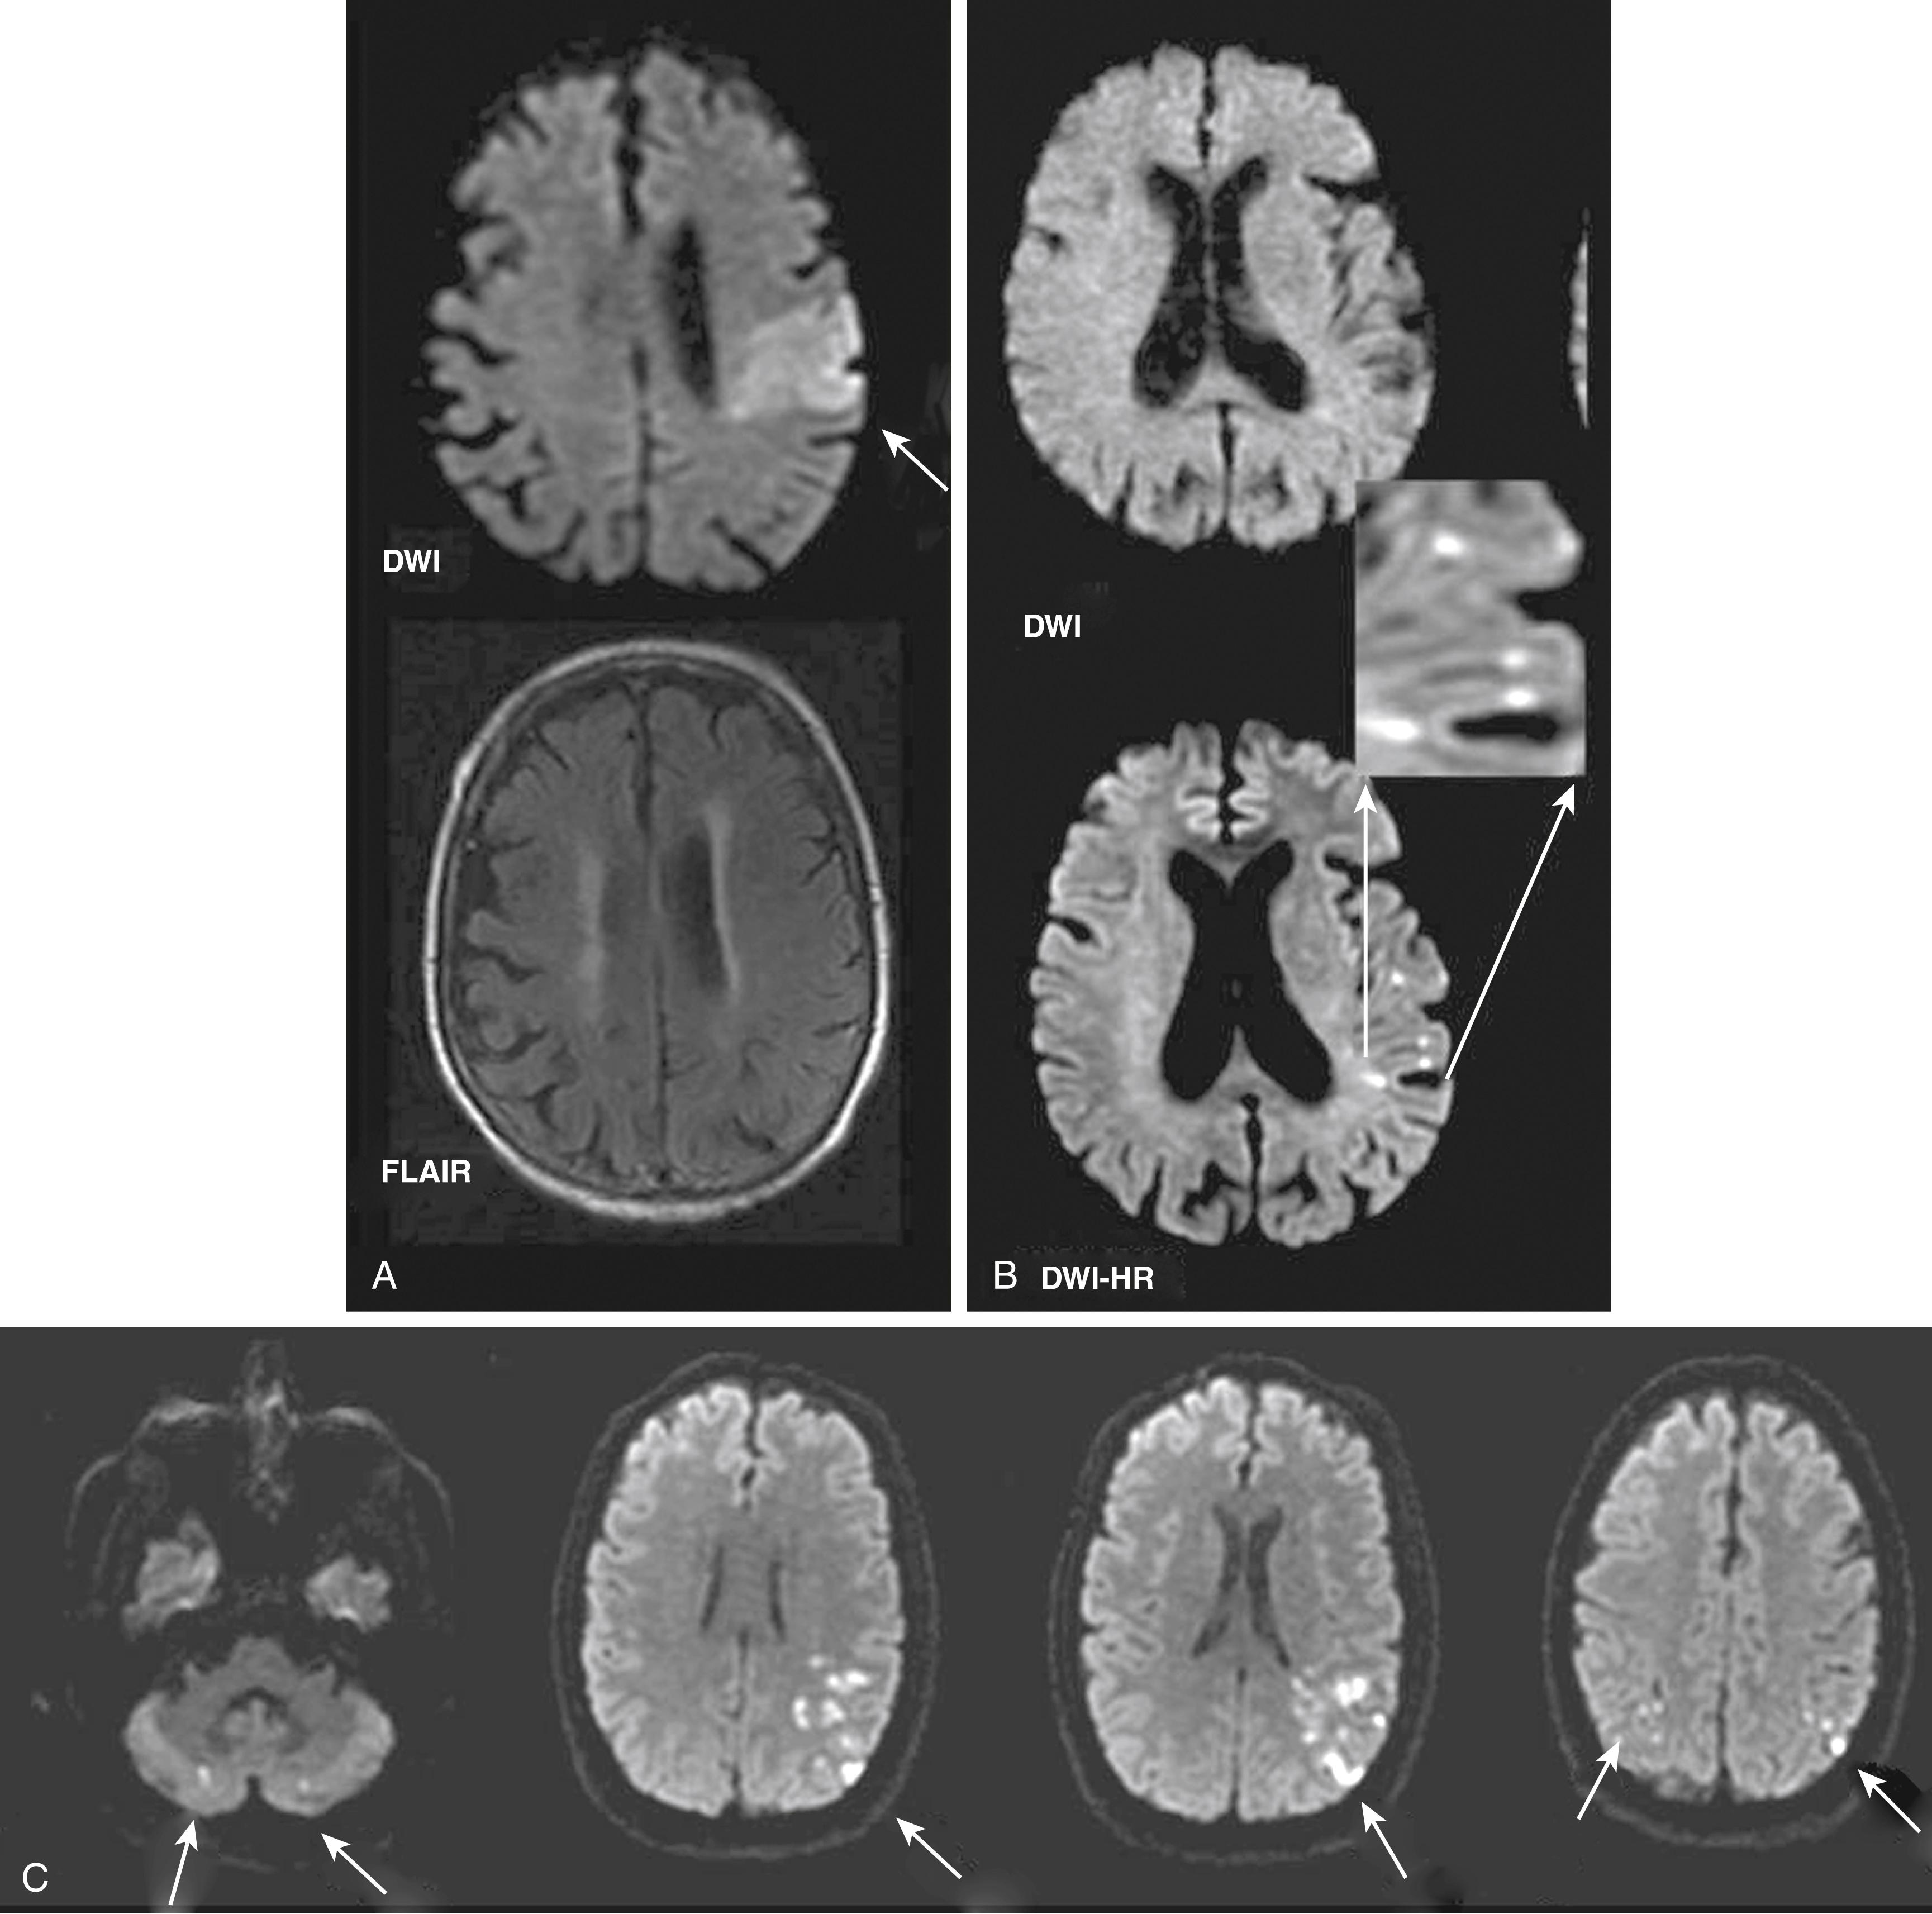 Fig. 48.4, Detection of hyperacute ischemic stroke with diffusion-weighted imaging (DWI) . (A) The characteristic MRI pattern of hyperacute ischemic stroke, which is DWI-positive (arrow) and fluid-attenuated inversion recovery (FLAIR) -negative. (B) High-resolution DWI (DWI-HR) may reveal punctate acute ischemic lesions not seen on the more typical lower-resolution DWI. The use of DWI-HR may further reduce the probability of false-negative DWI in stroke. (C) Acute ischemic lesions (arrows) in multiple arterial territories suggestive of cardioembolic mechanism.